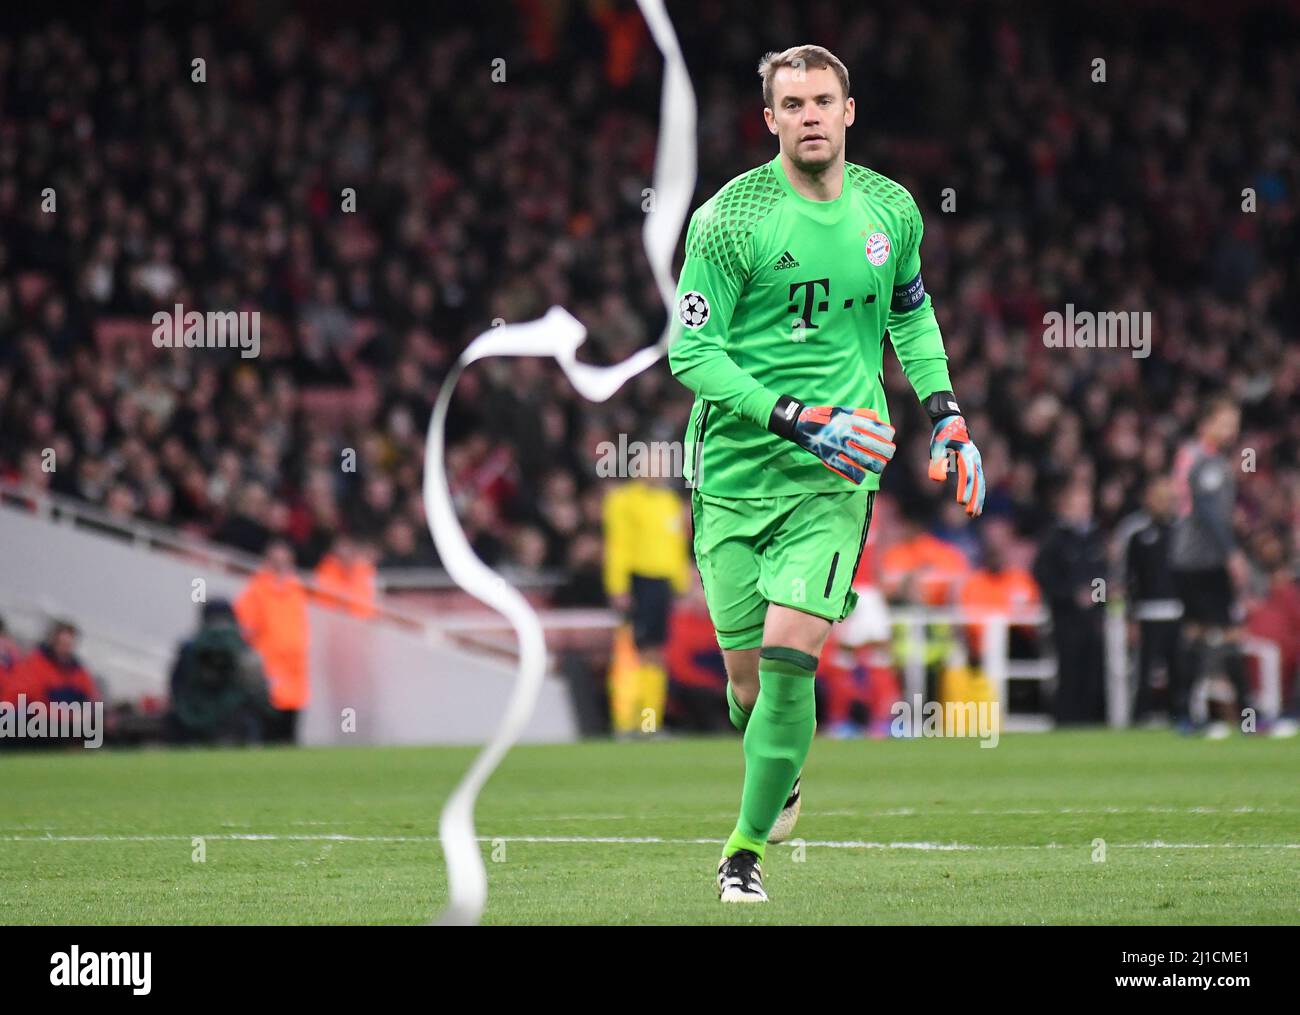 LONDON, ENGLAND - MARCH 7, 2017: Manuel Neuer cleans the pitch after Bayern ultras thrown paper rolls during the second leg of the UEFA Champions League Round of 16 game between Arsenal FC and Bayern Munchen at Emirates Stadium. Copyright: Cosmin Iftode/Picstaff Stock Photo